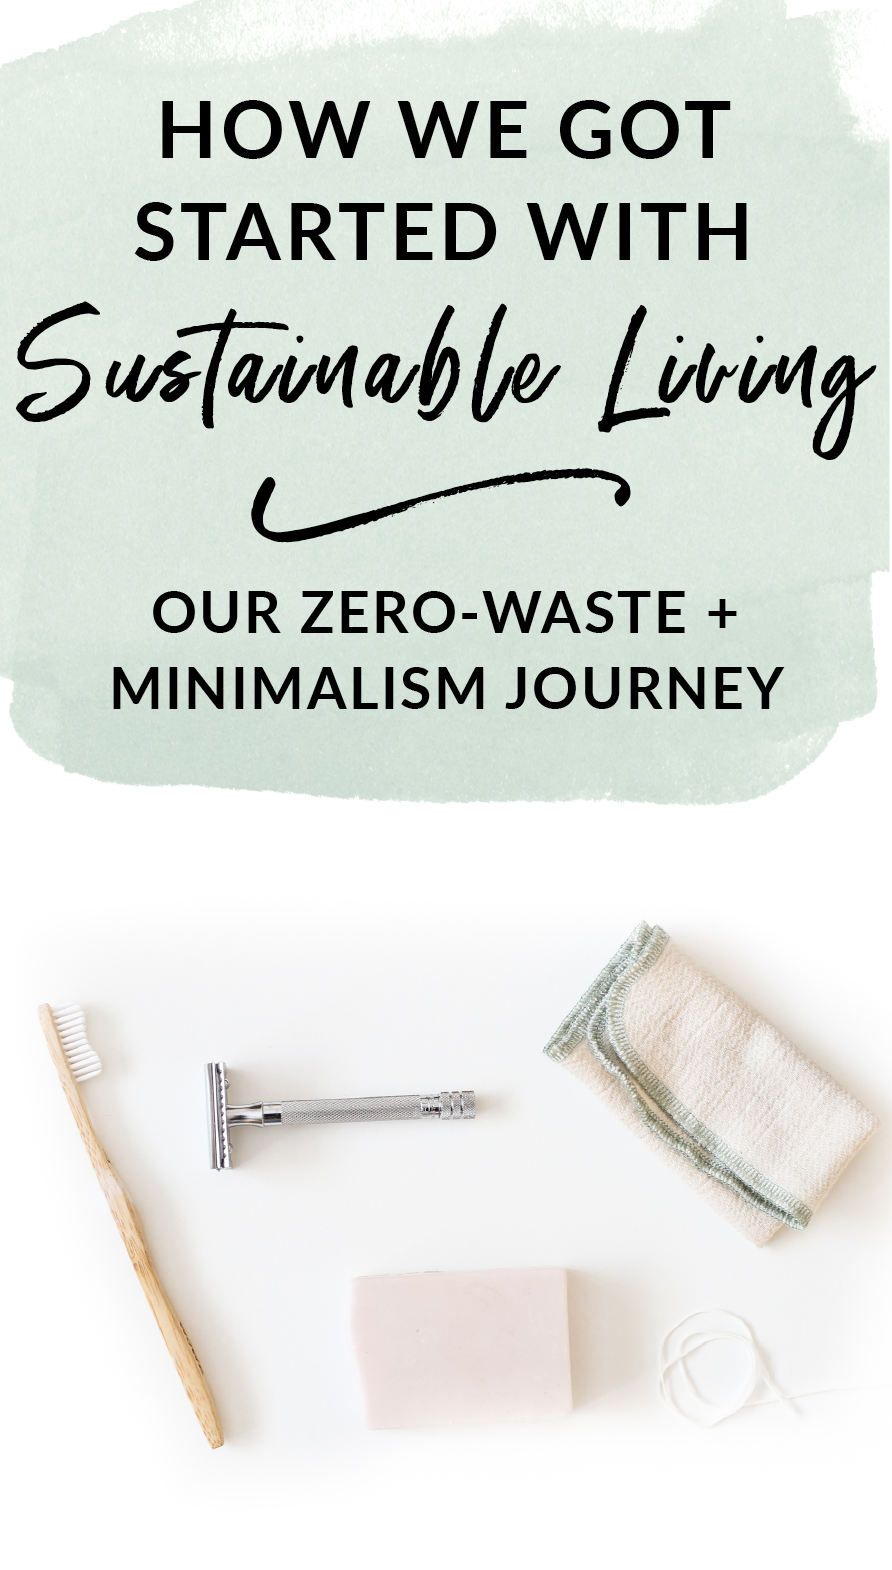 How we got started with living sustainably, our zero waste and minimalism journey